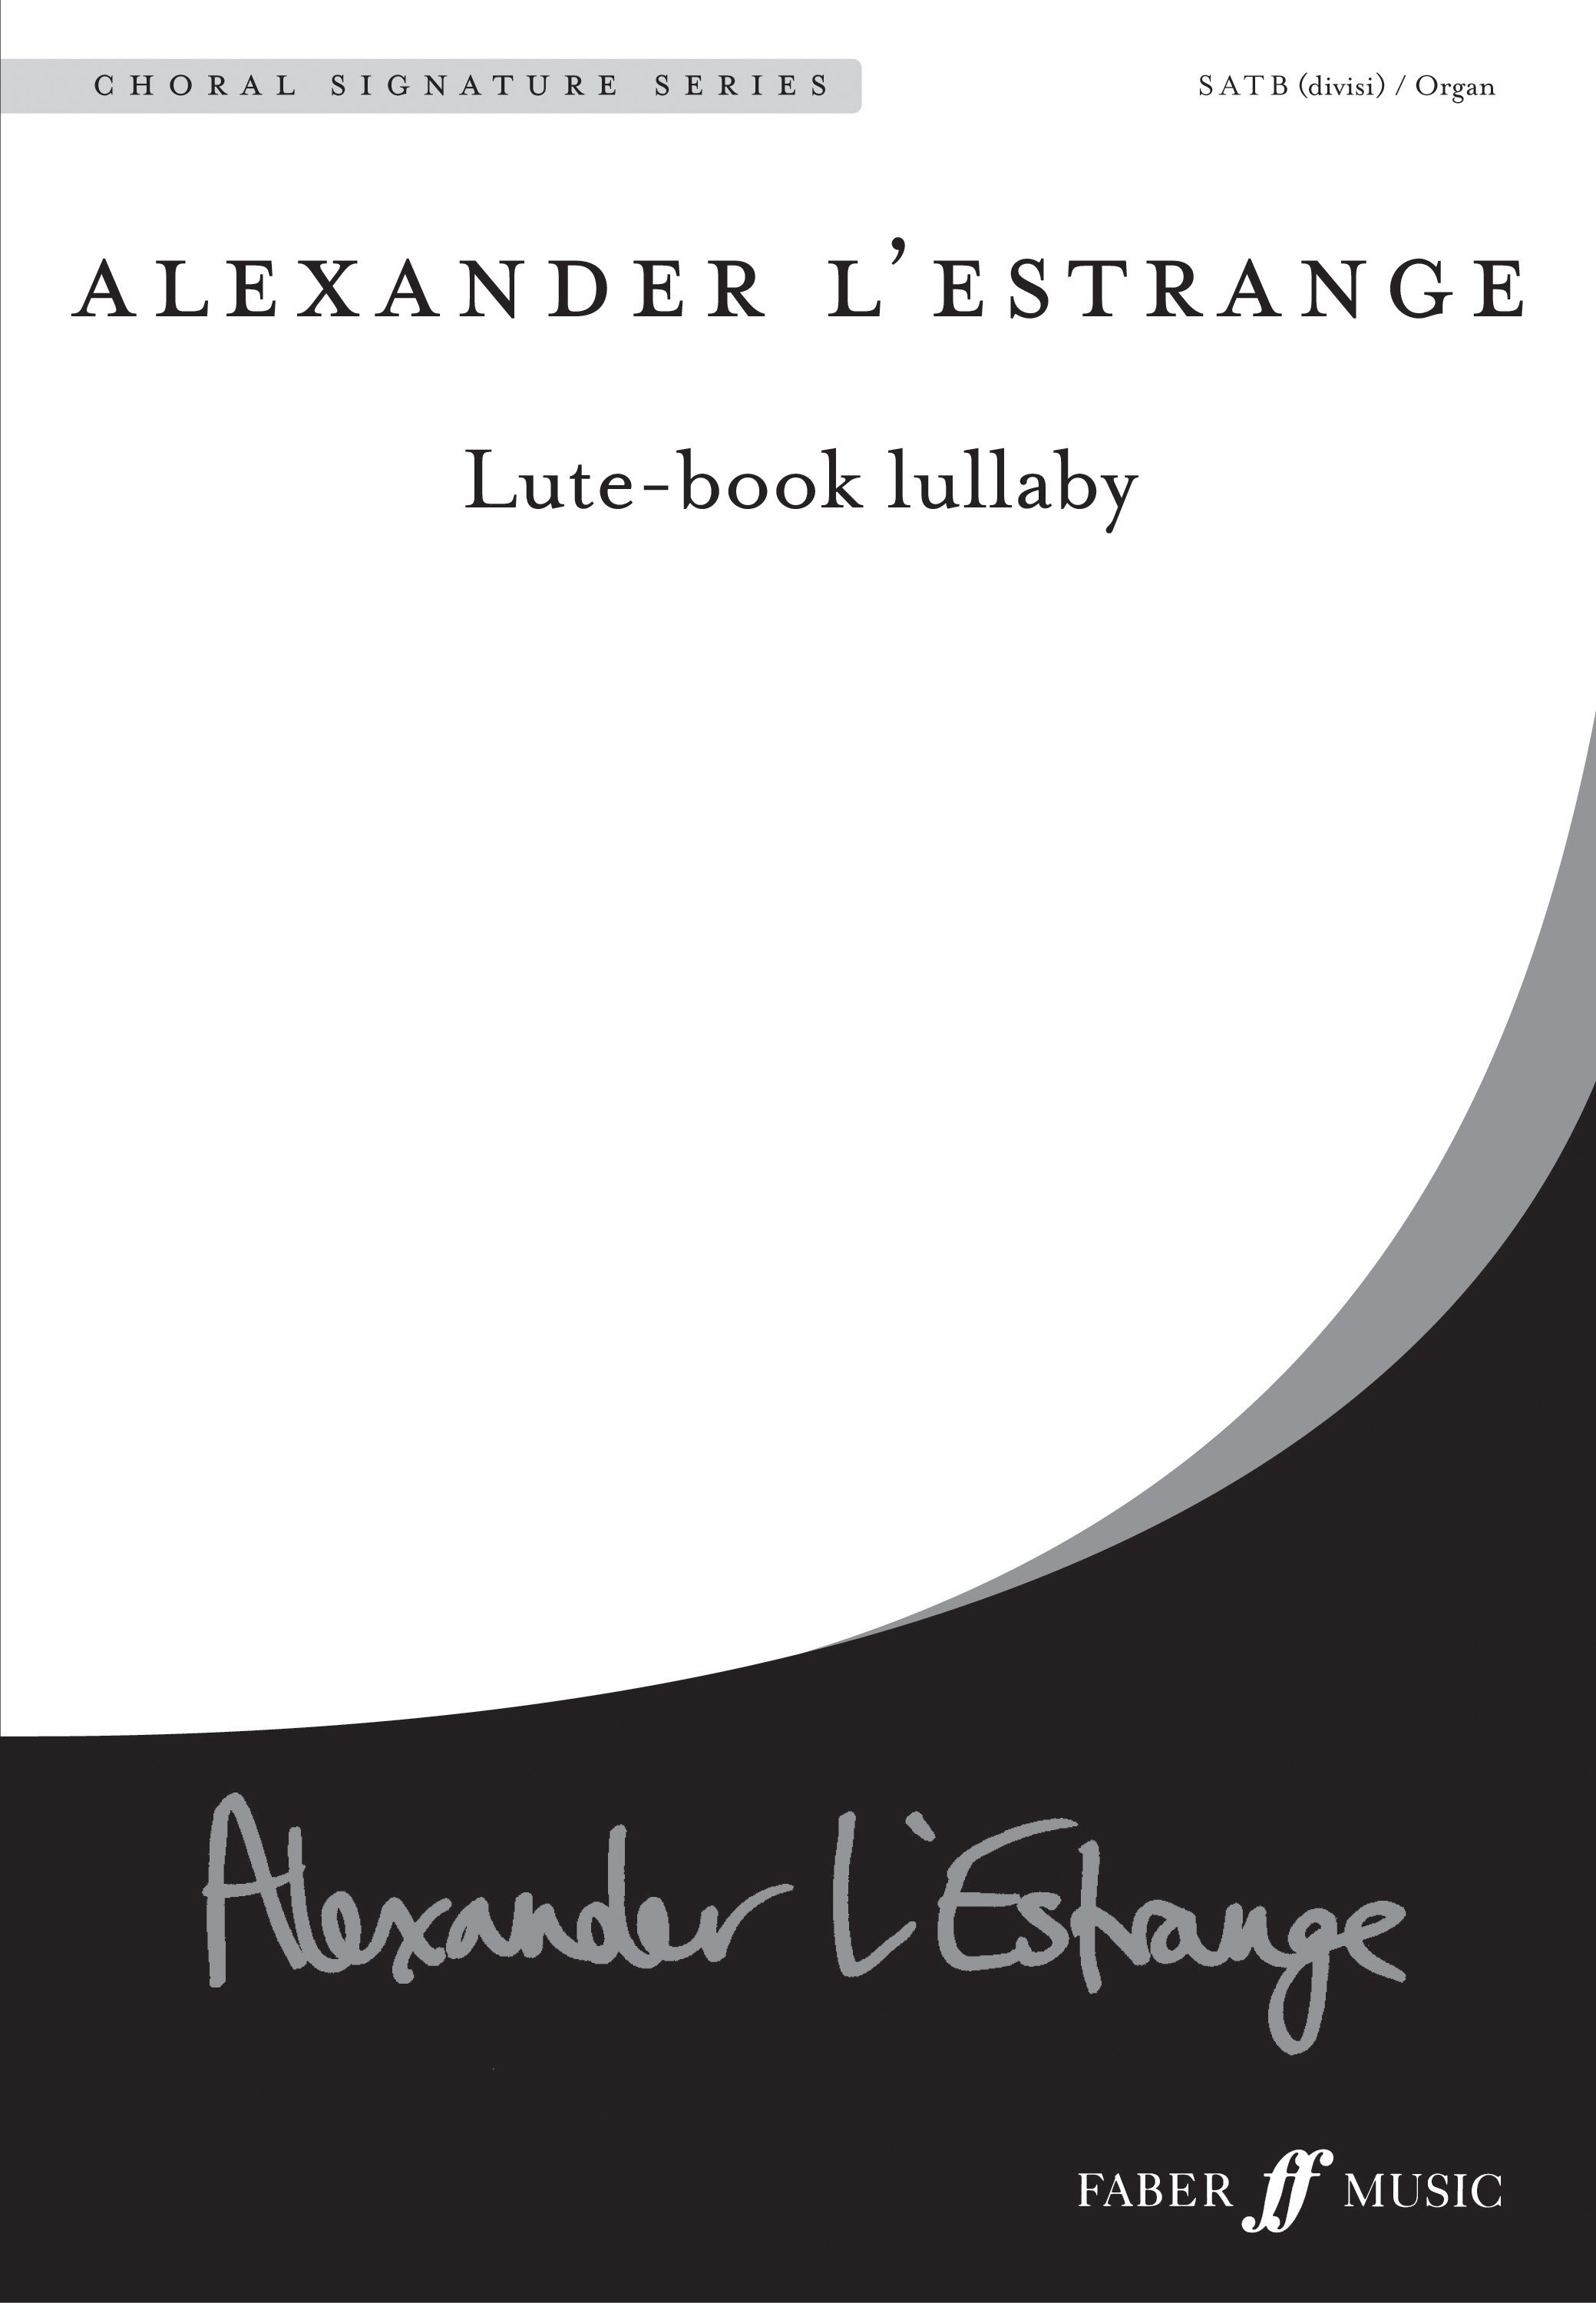 Lute-book Lullaby SATB + organ OLD COVER.jpg